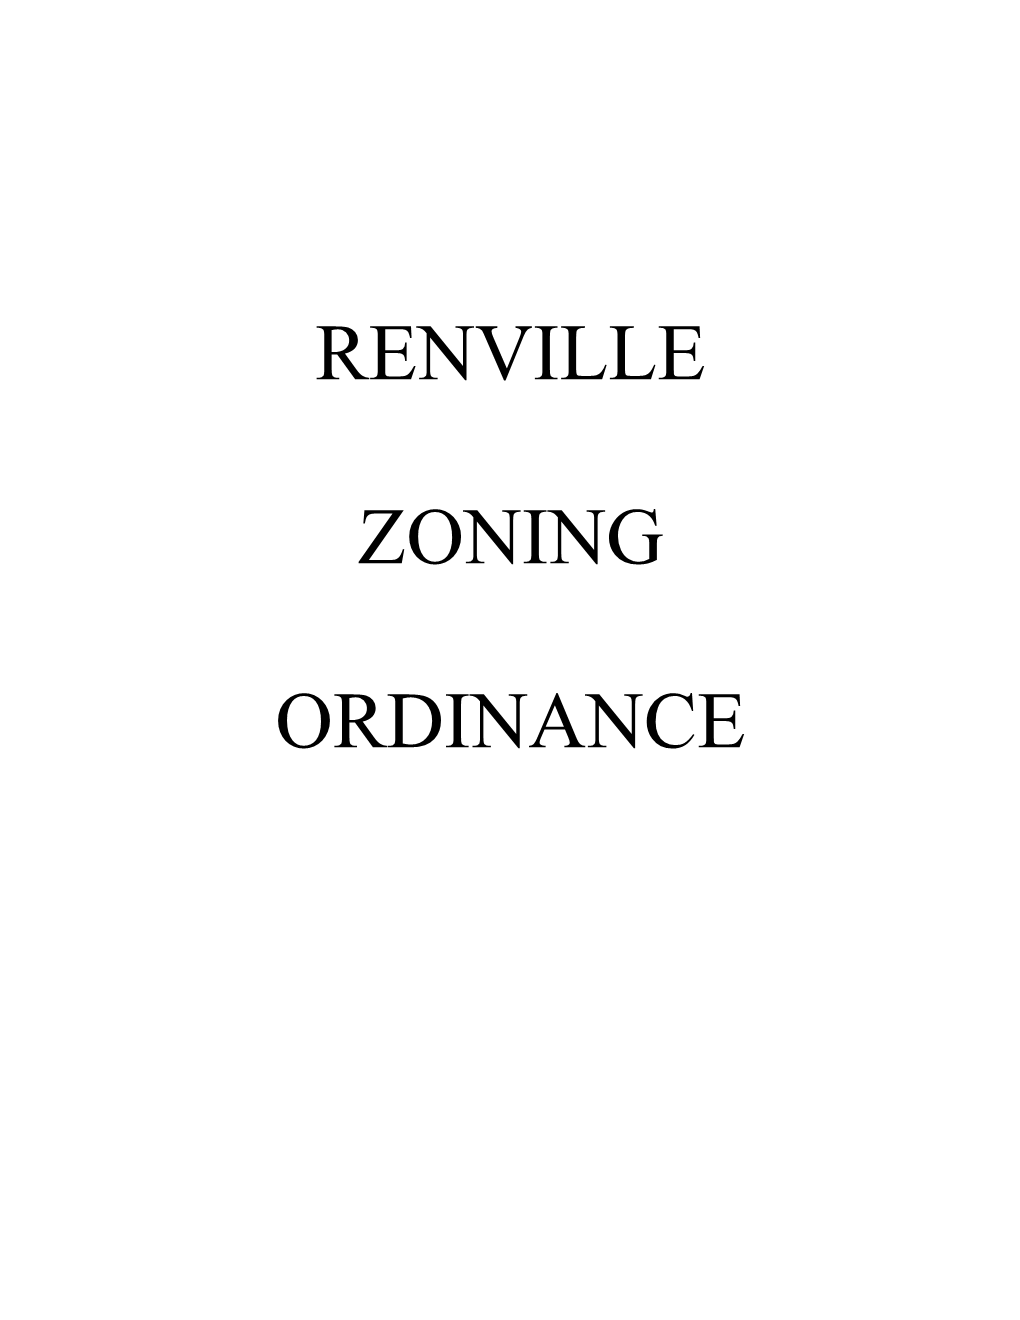 Article I, ZONING DISTRICTS and OFFICIAL ZONING MAP